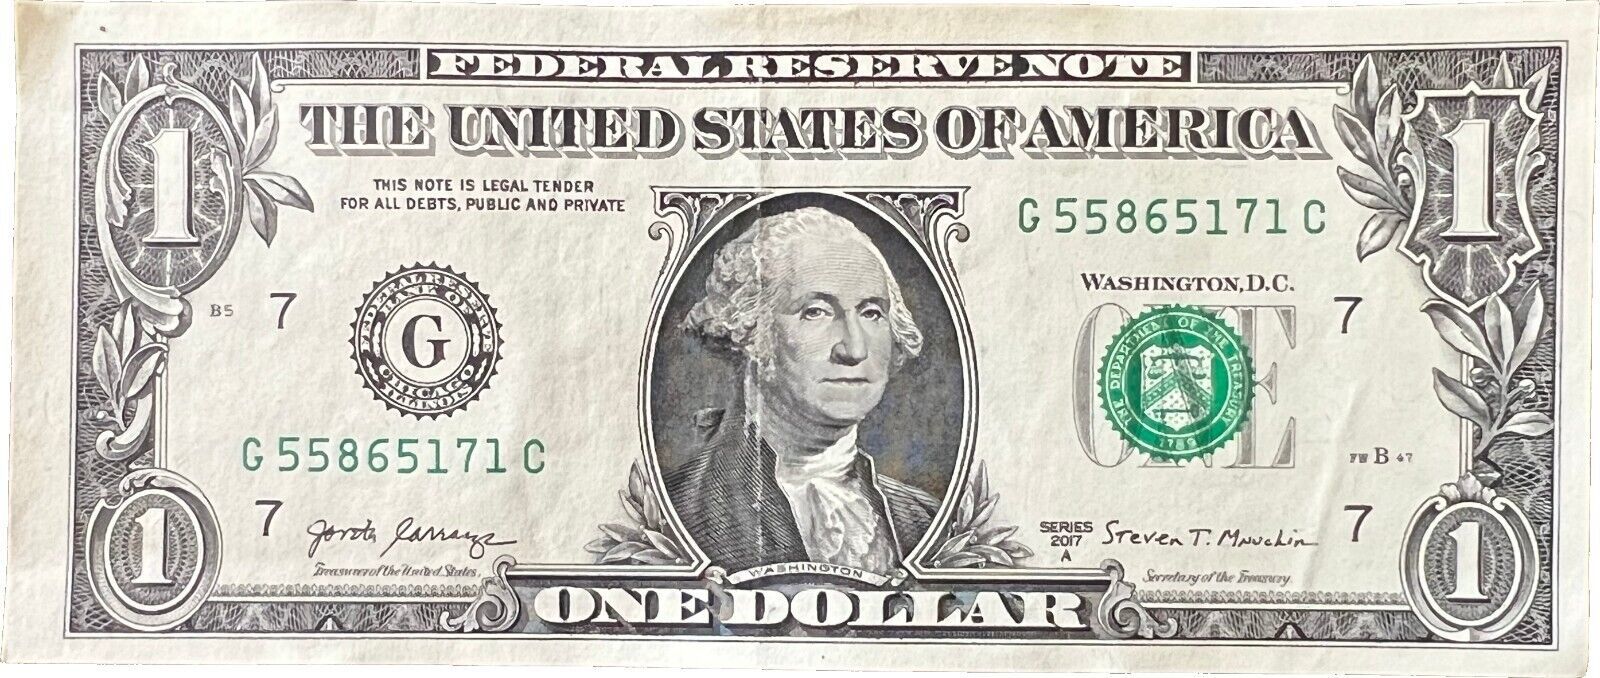 Primary image for $1 One Dollar Bill 55865171, miscut